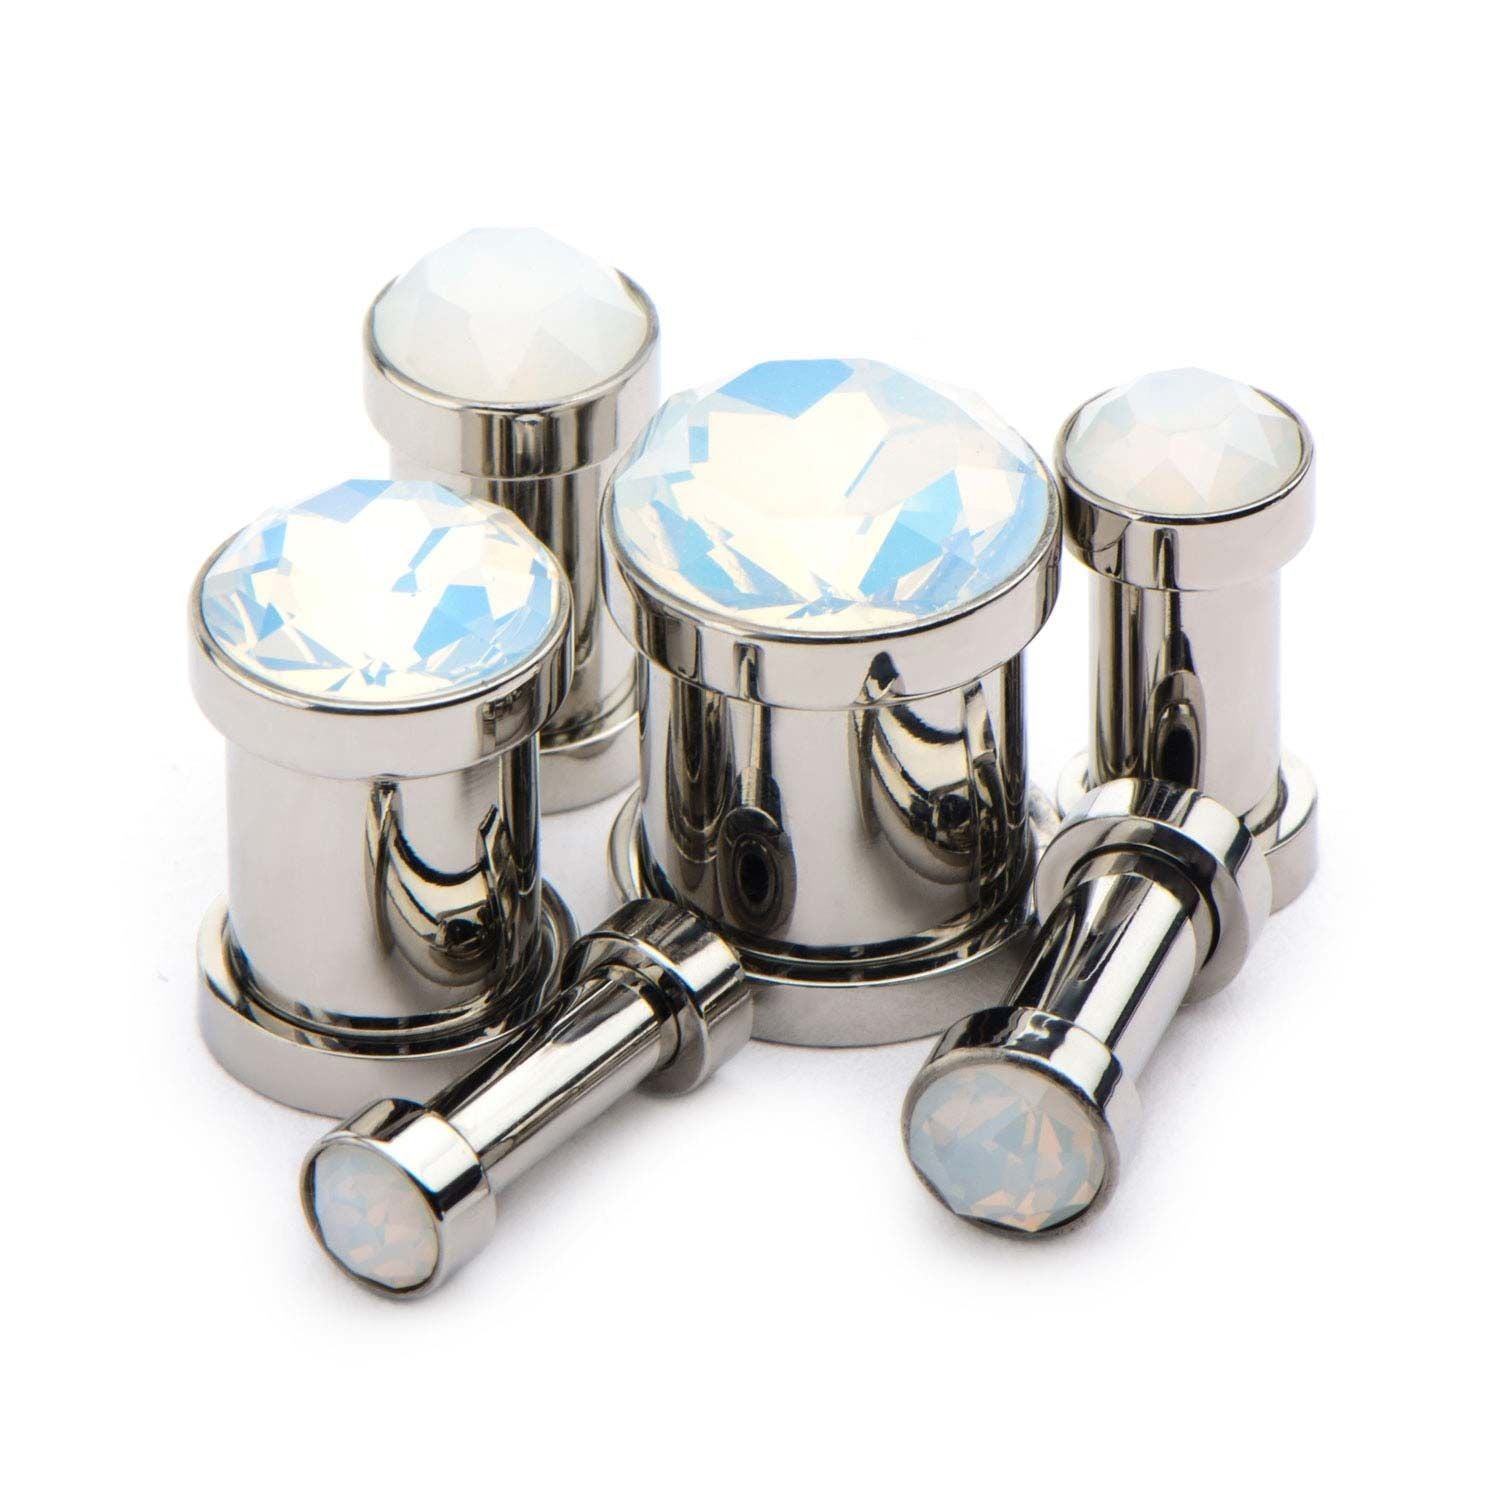 White Faceted Opalite Gem Front Plugs - 1 Pair sbvps2836wh